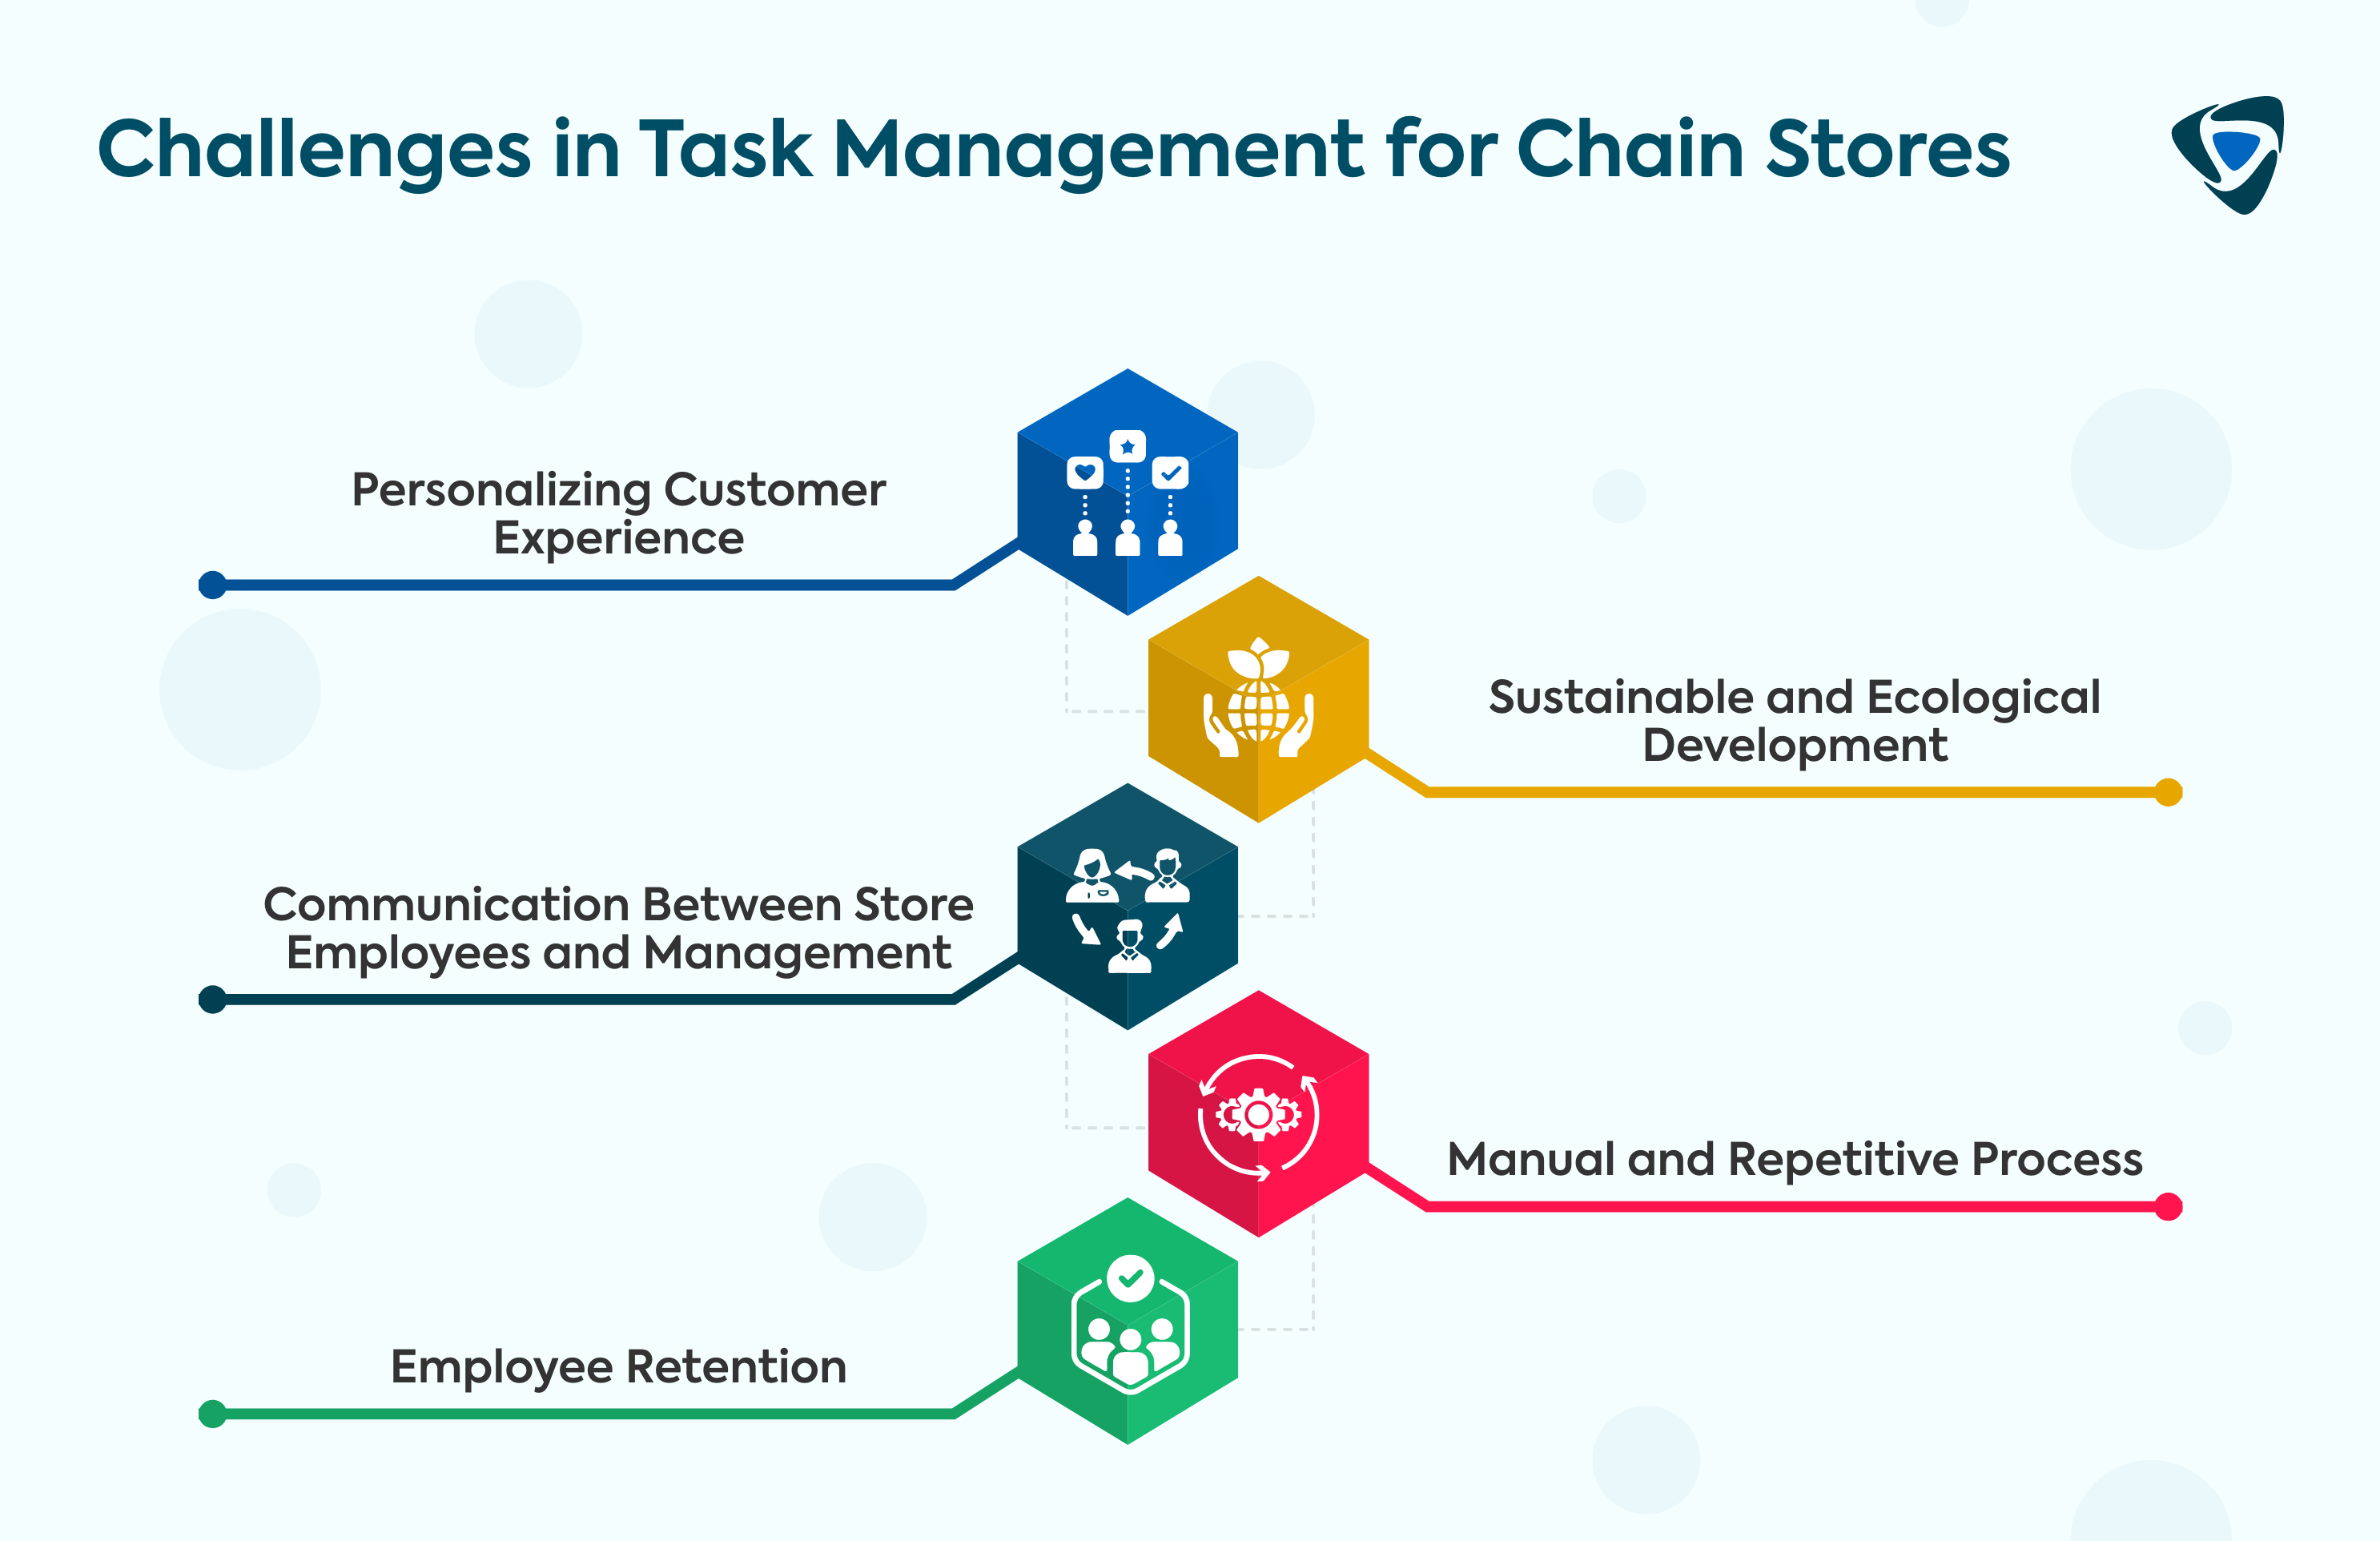 Challenges in Task Management for Chain Stores